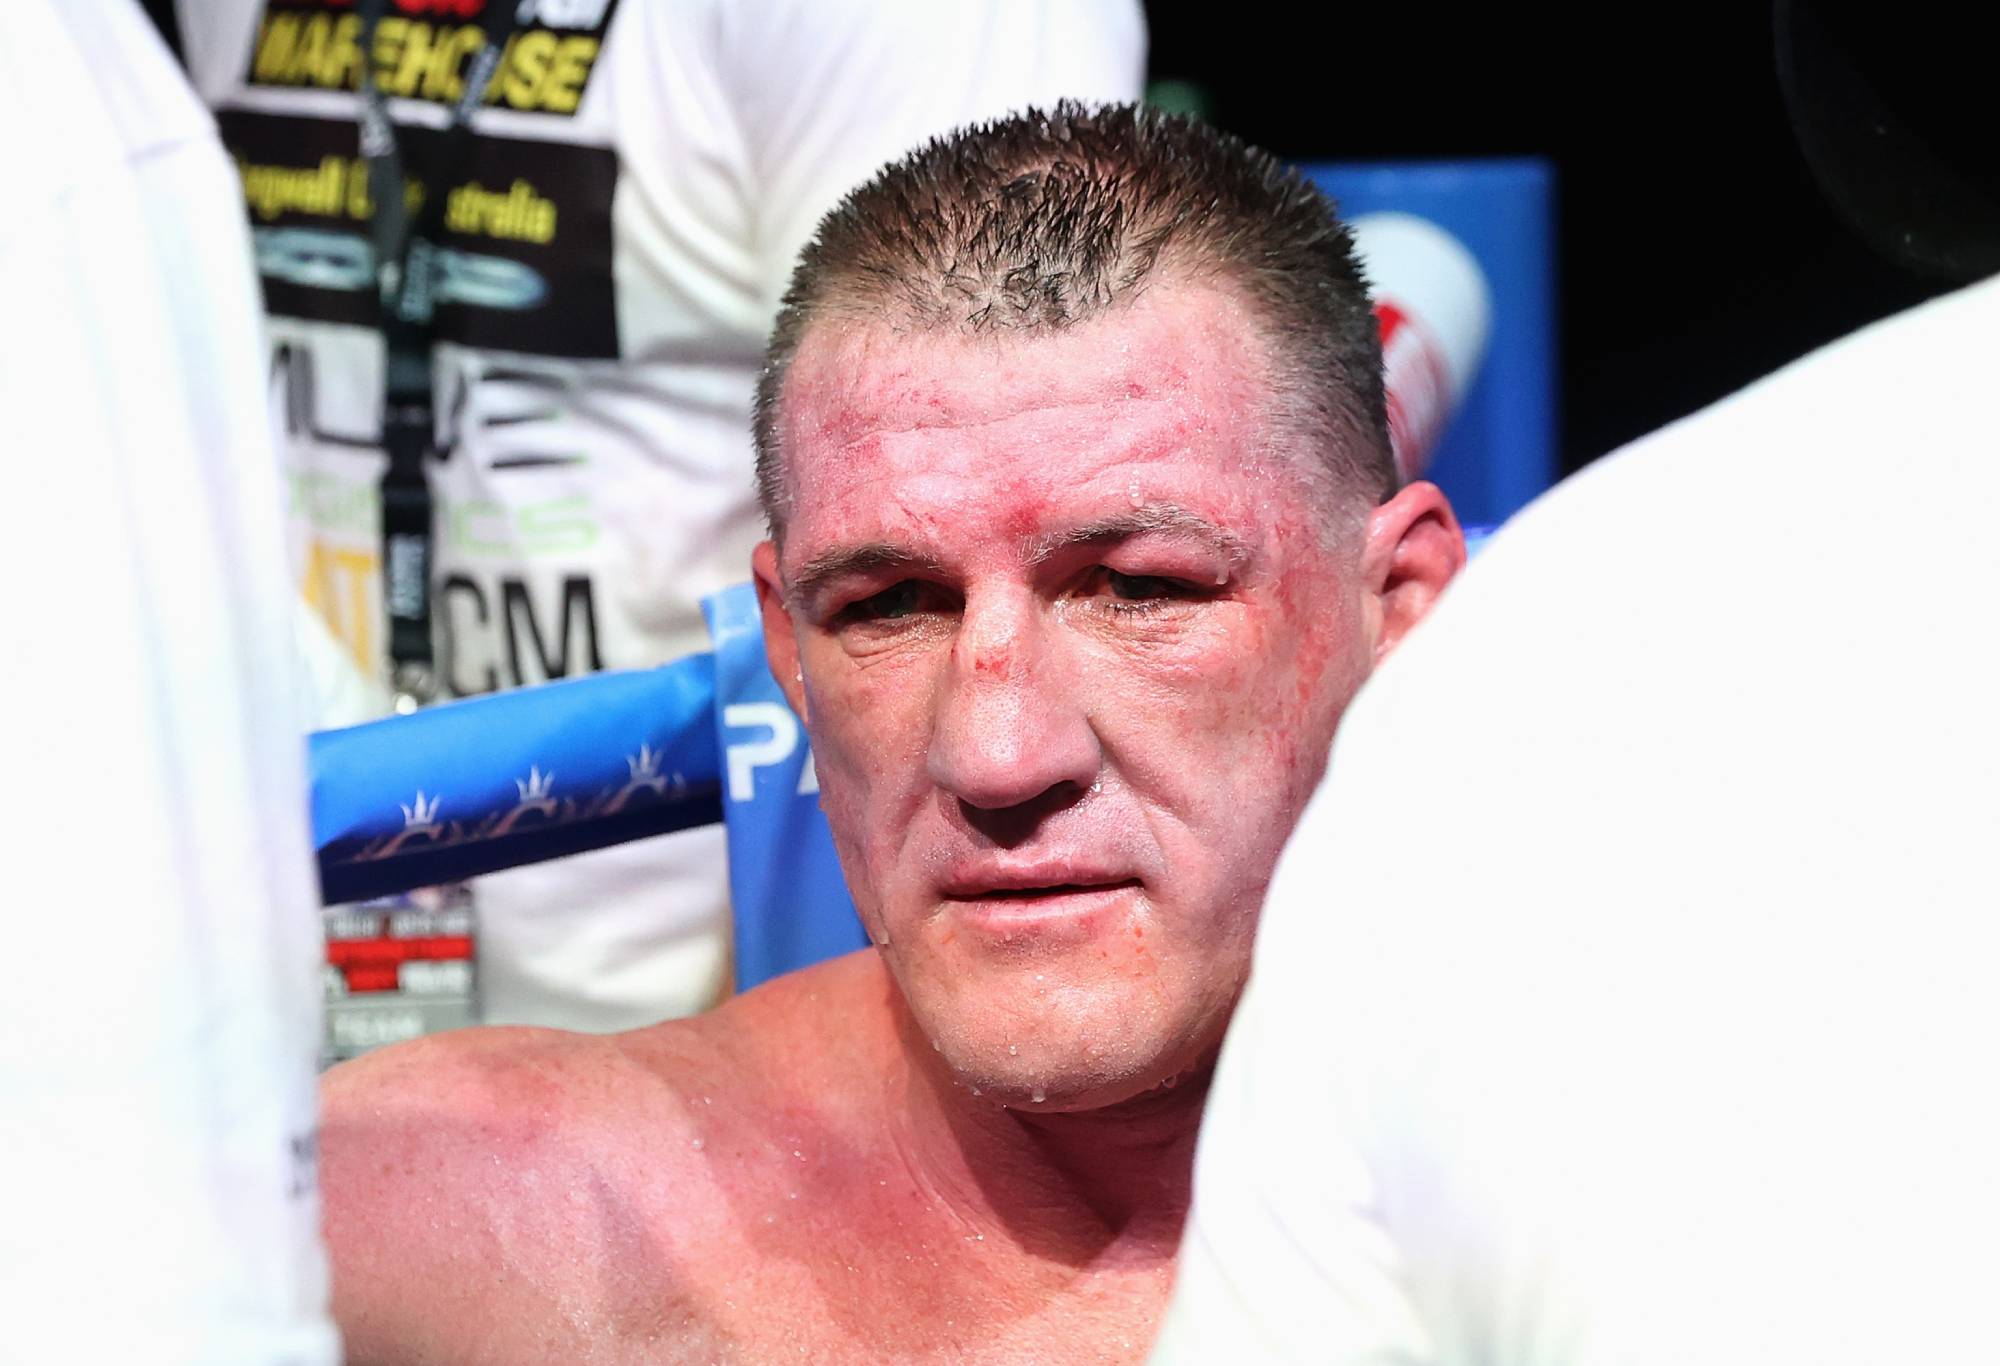 Paul Gallen sits in his corner after losing to Justis Huni in their Australian heavyweight title fight at ICC Sydney on June 16, 2021 in Sydney, Australia.  (Photo by Cameron Spencer/Getty Images)